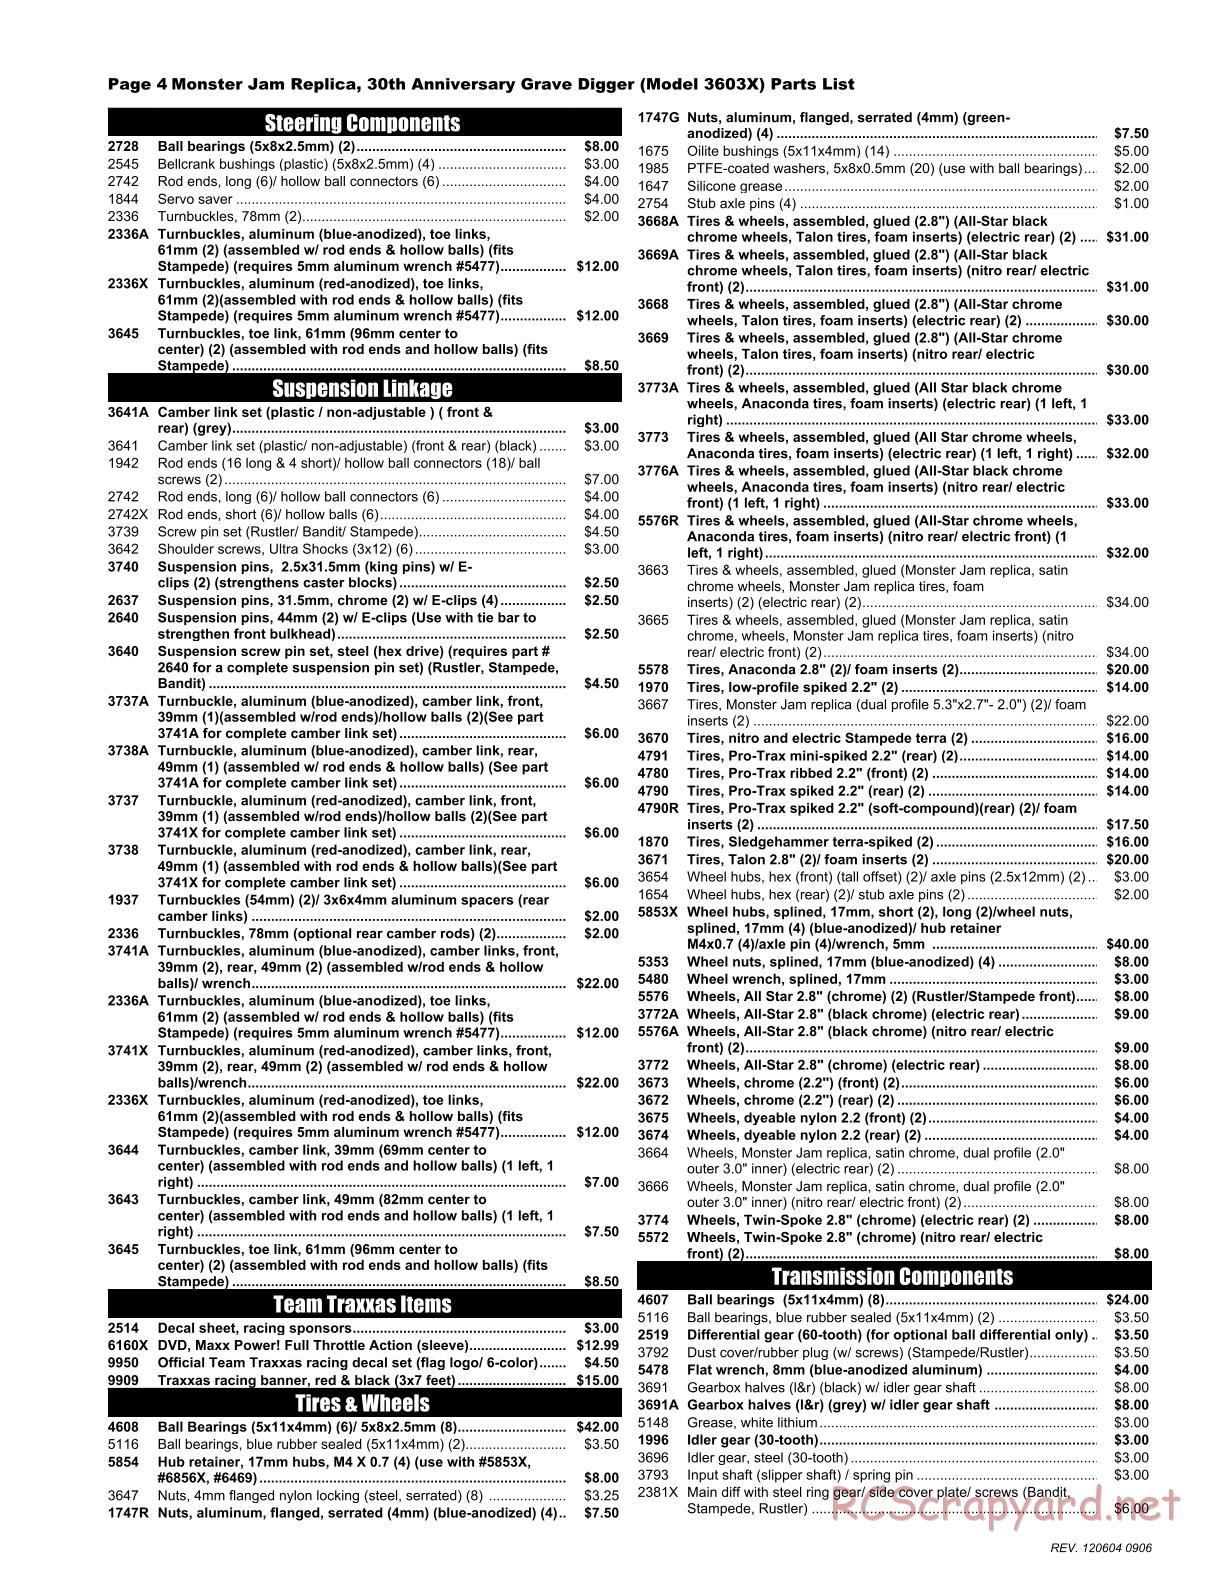 Traxxas - Monster Jam - Grave Digger 30th Anniversary Special - Parts List - Page 4